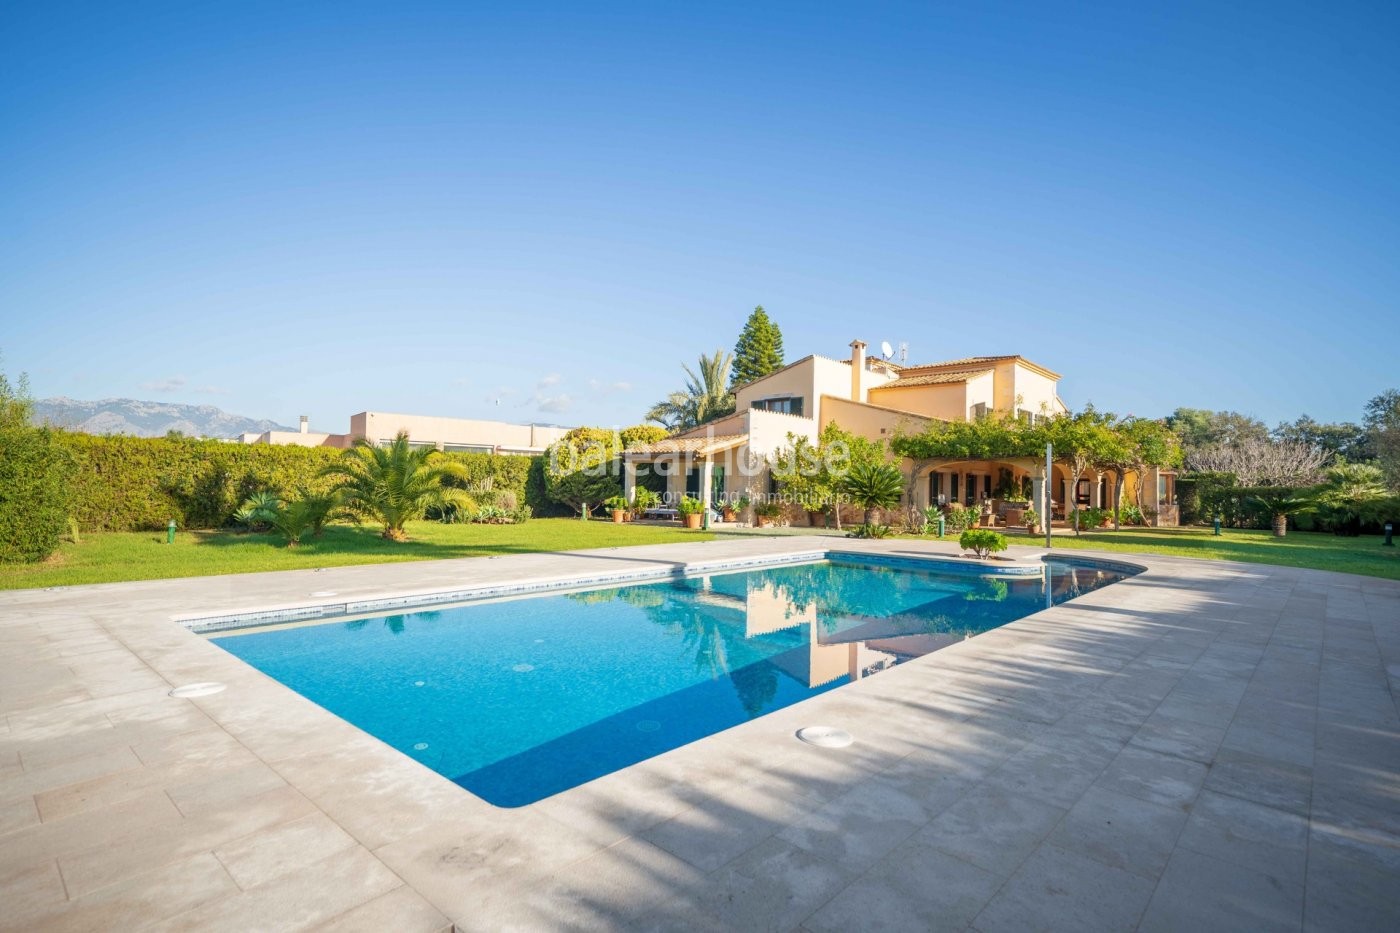 Spacious house with a large private garden and pool in tranquil residential area.